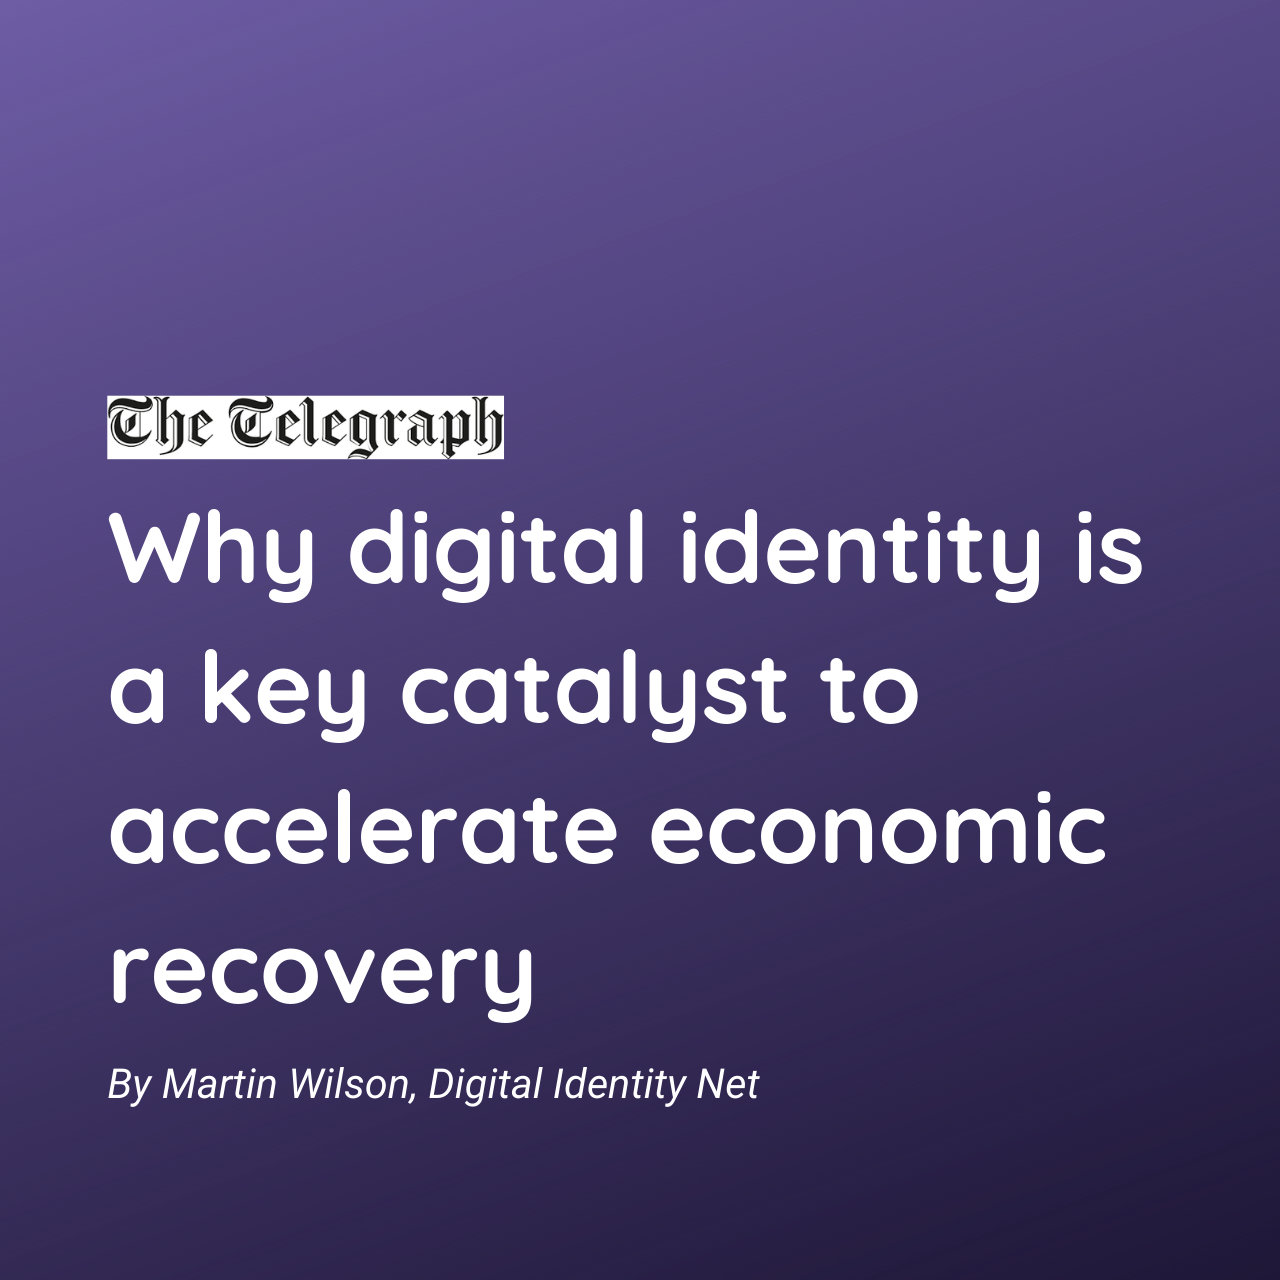 Why digital identity is a key catalyst to accelerate economic recovery